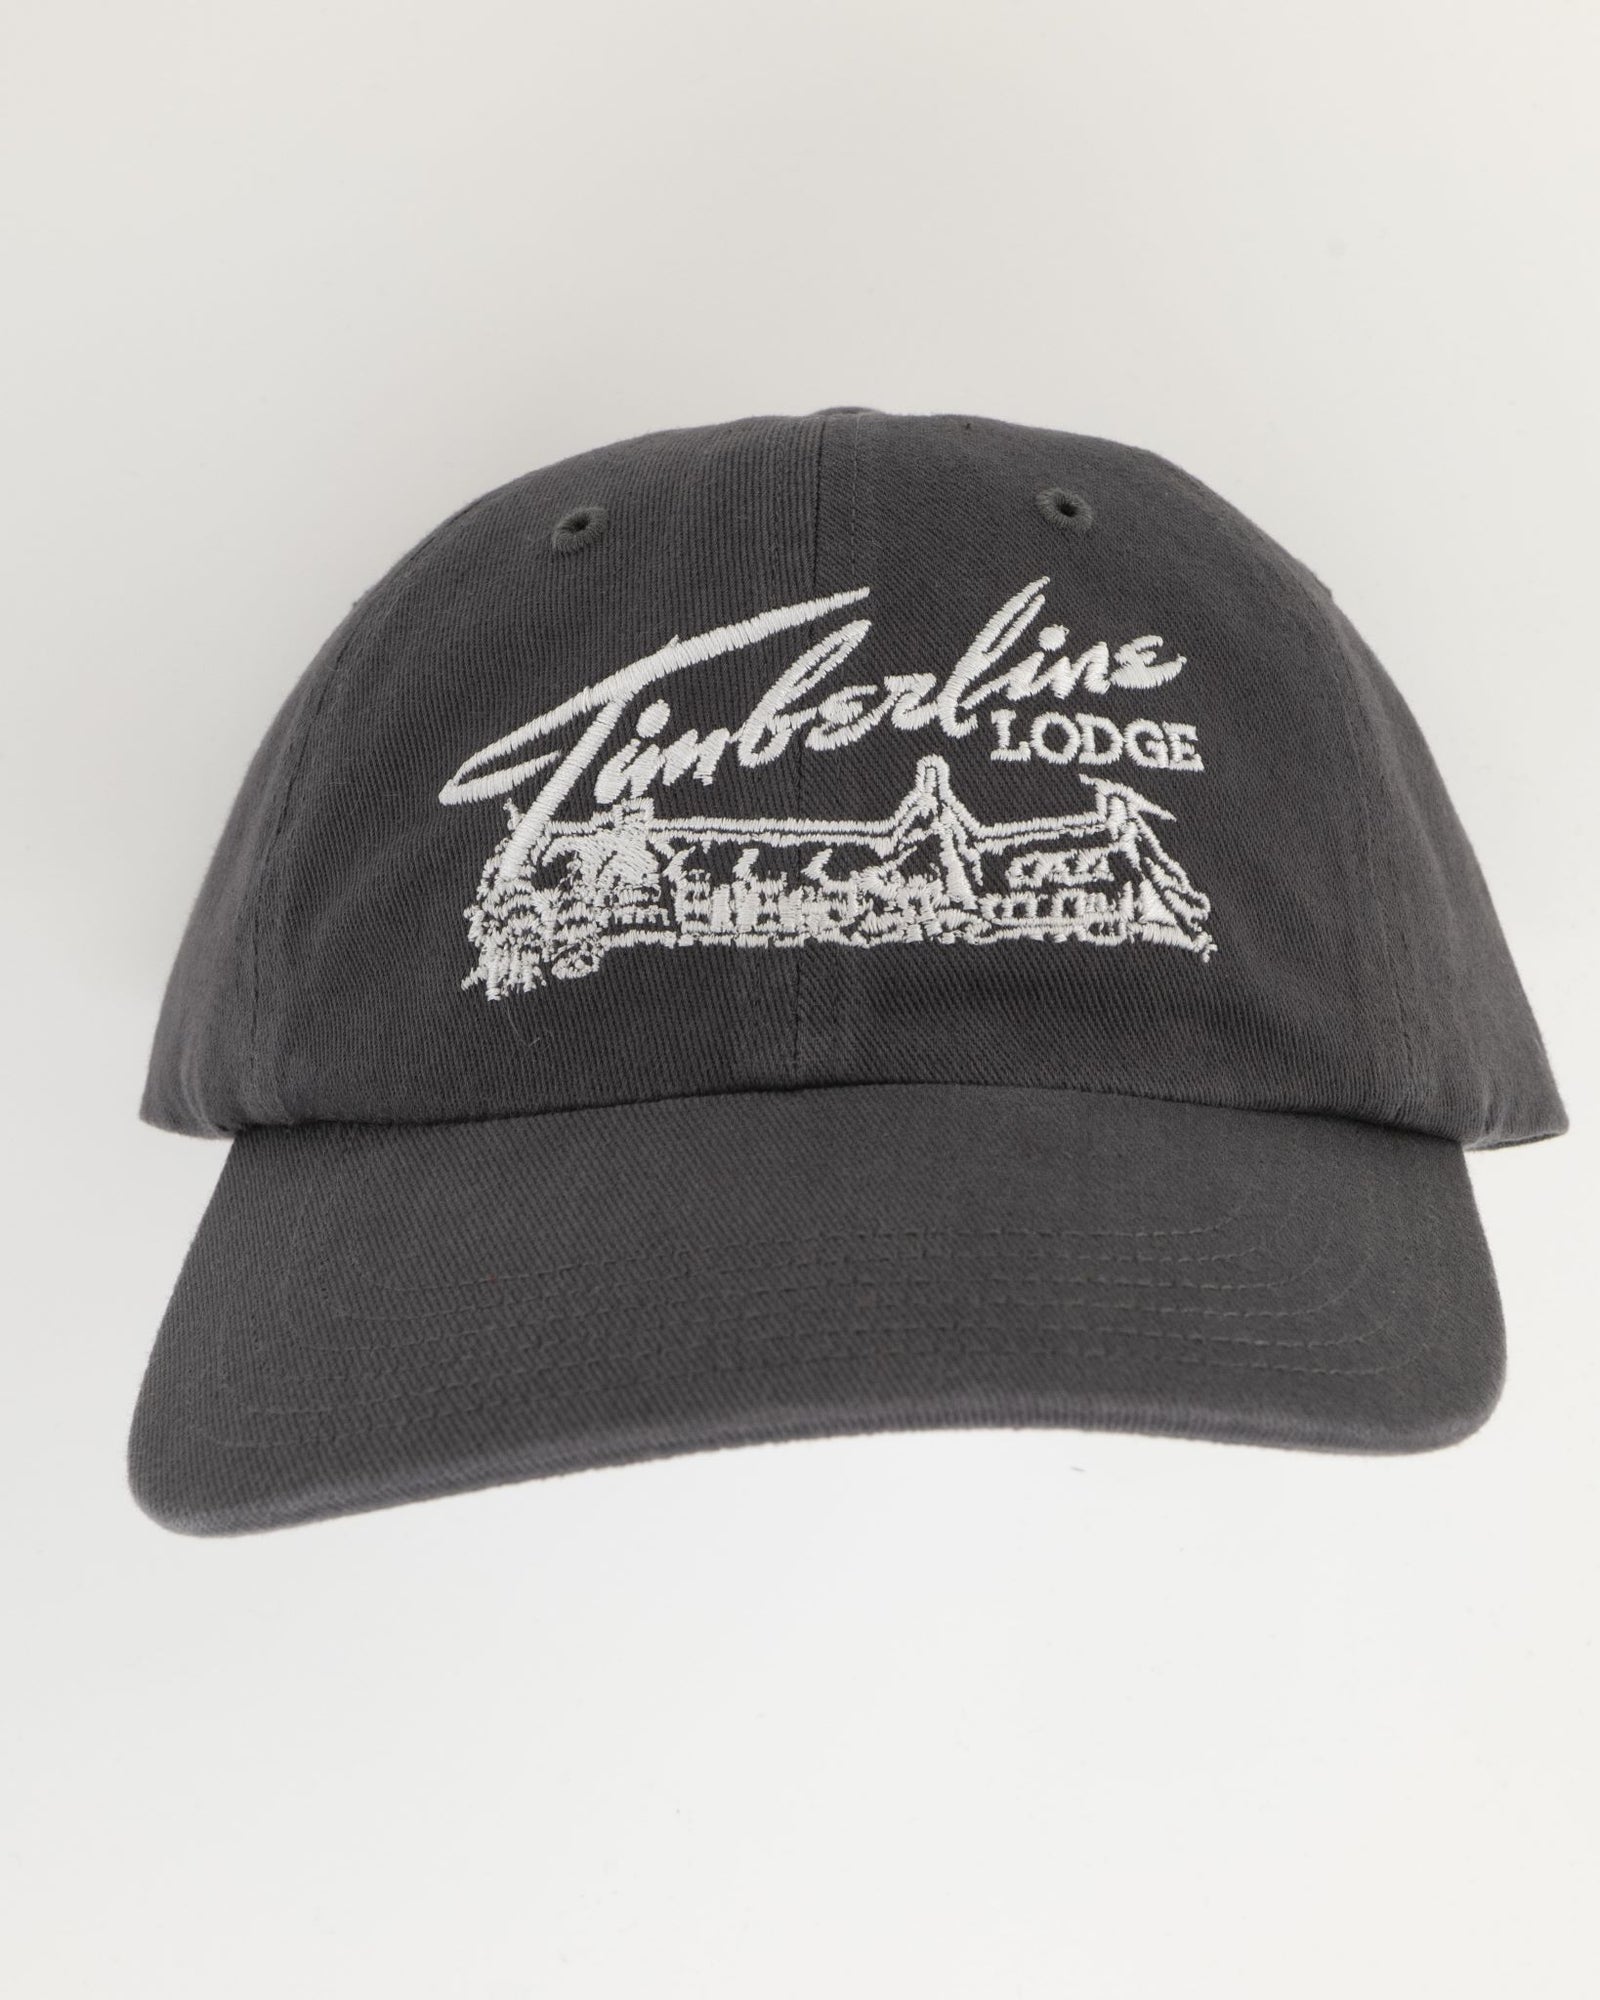 Hat - Blue Timberline Lodge - Online Store Iconic Navy - Cap